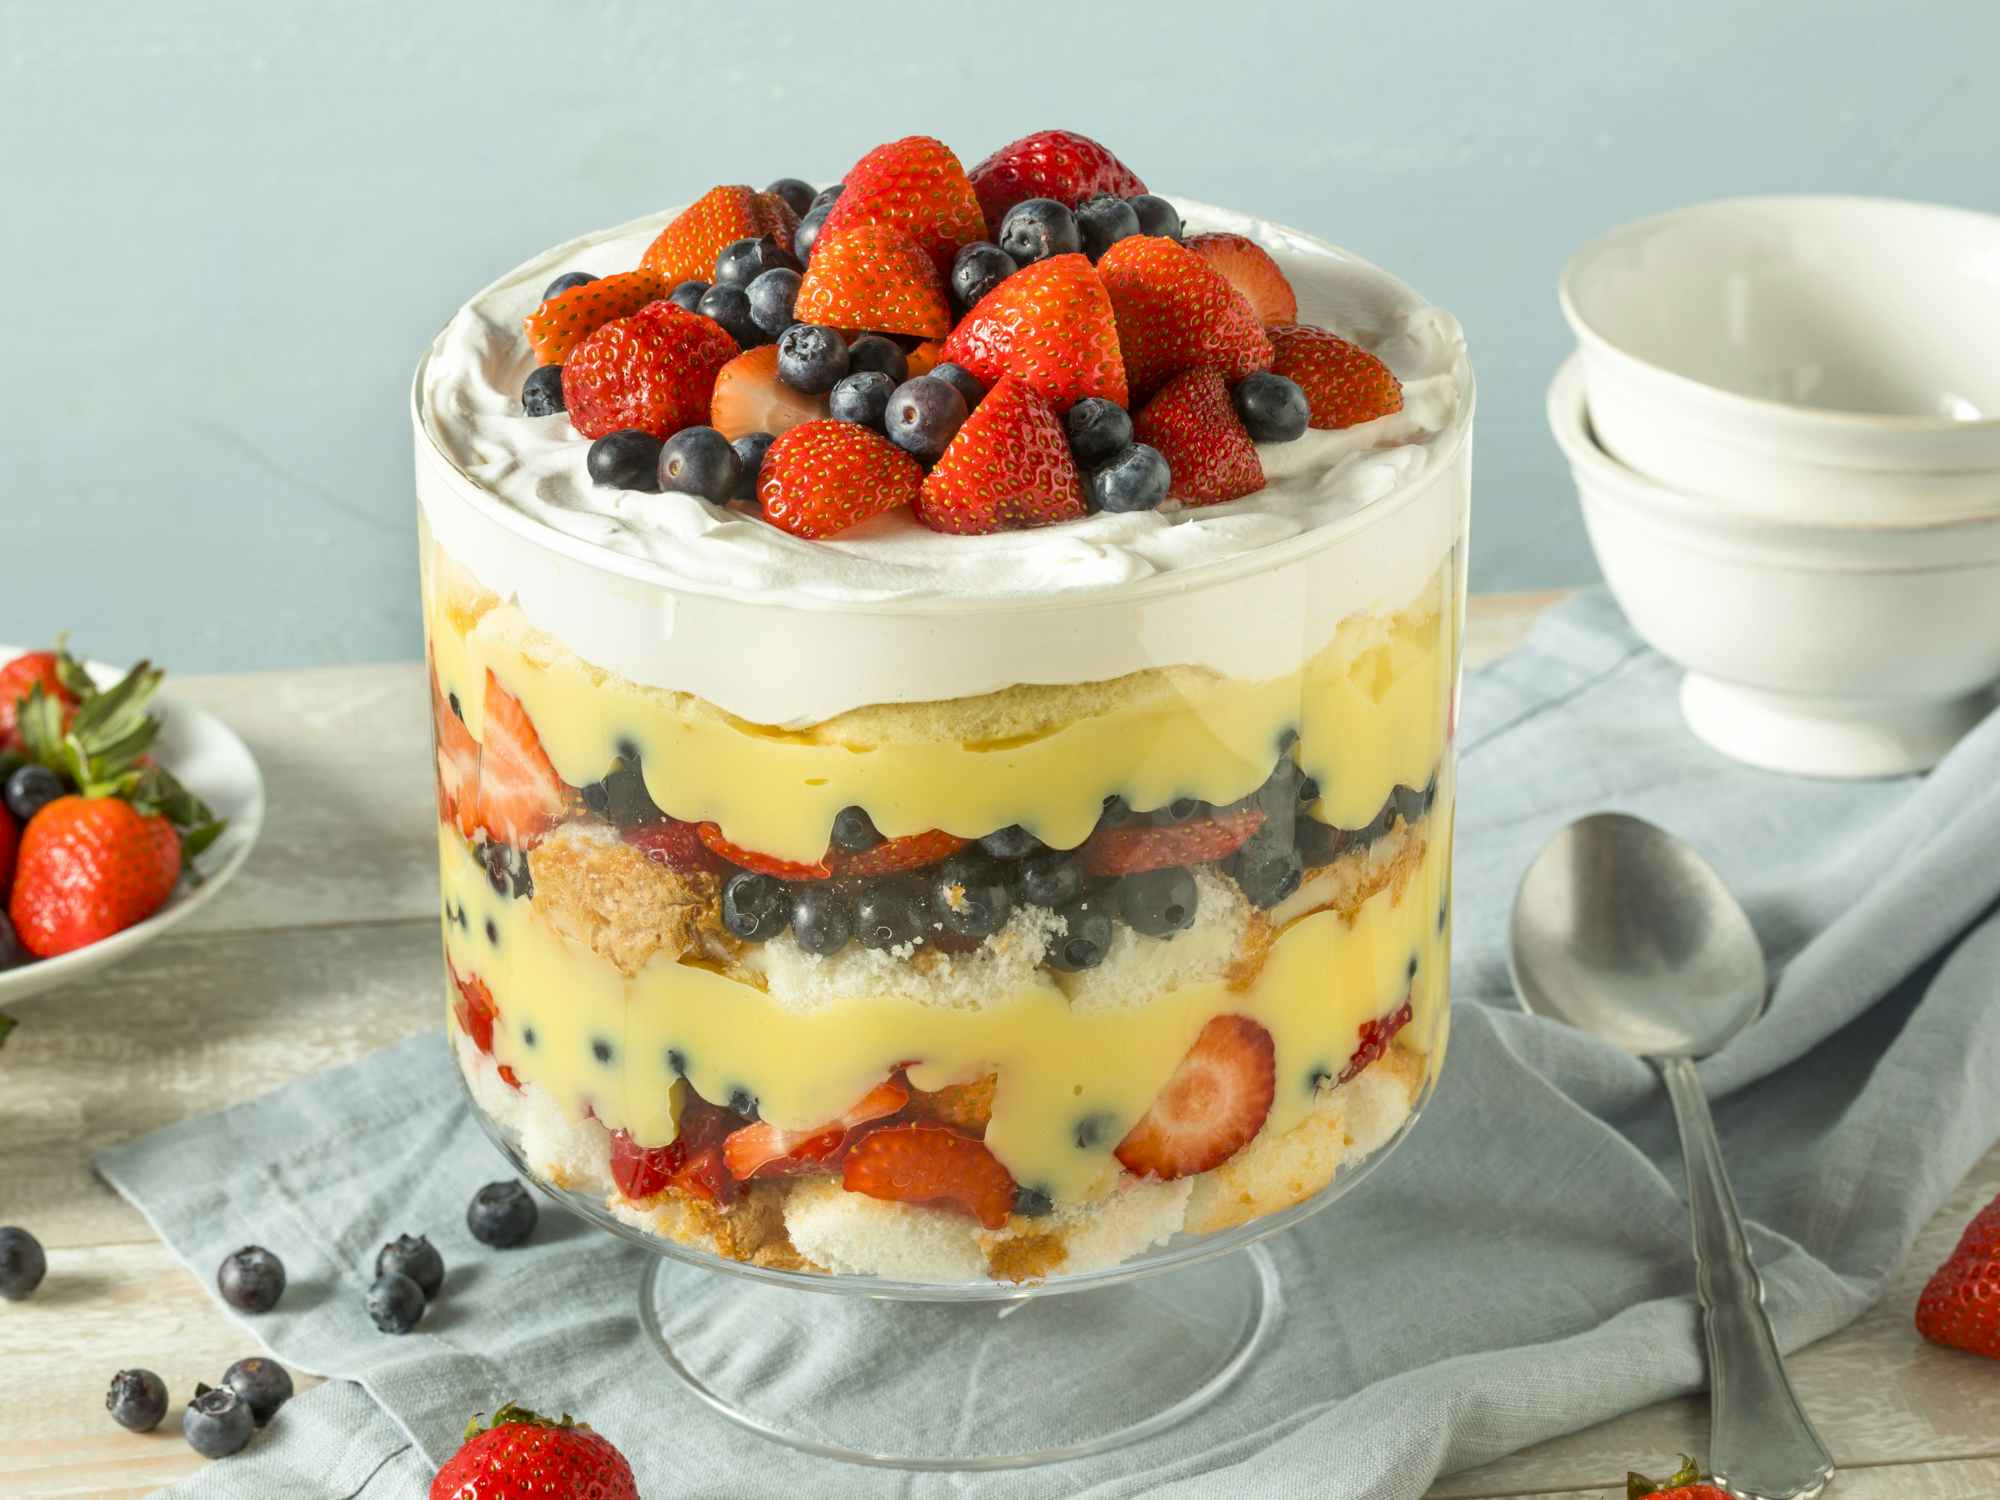 A large strawberry and blueberry trifle dessert on a table